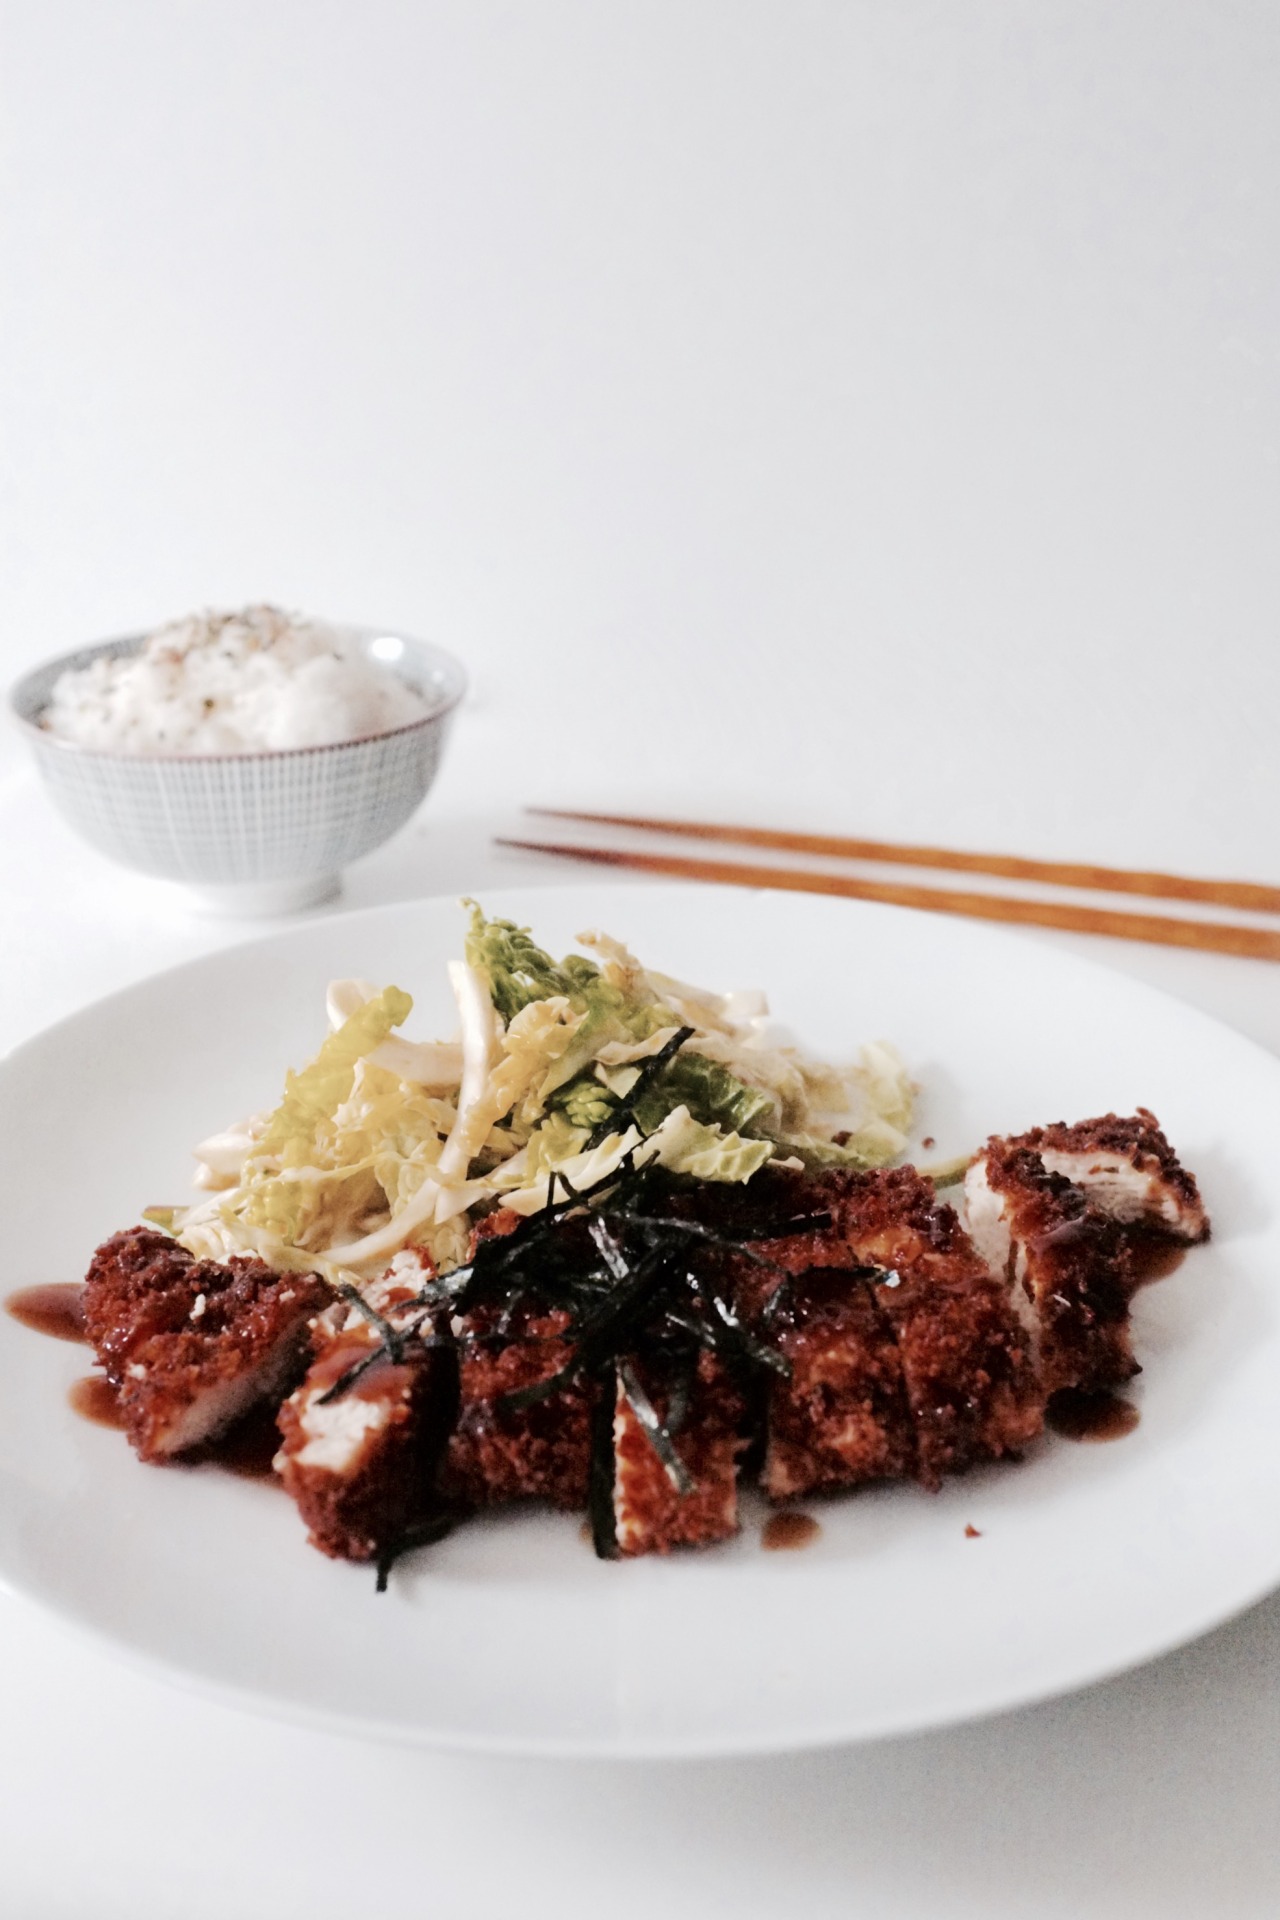 foodffs:  Chicken katsu. Japanese comfort food with a simple cabbage salad on the